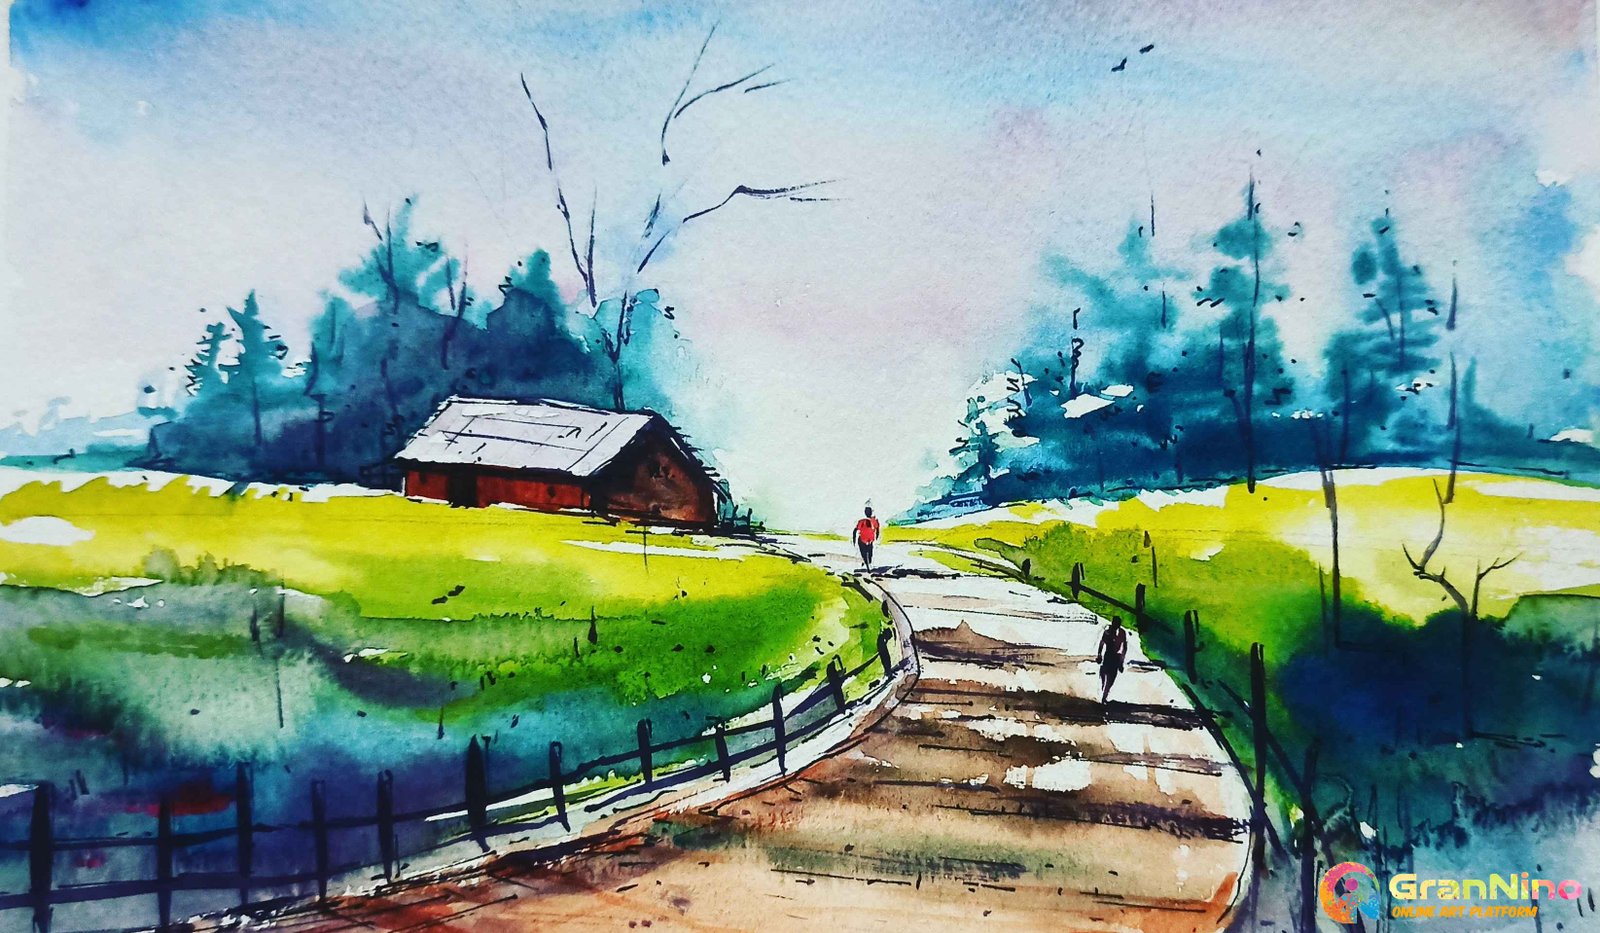 Beautiful scenery with oil pastel... - 𝐵𝒾𝓈𝓌𝒶𝒿𝒾𝓉 𝒜𝓇𝓉 𝒲𝑜𝓇𝓀 |  Facebook